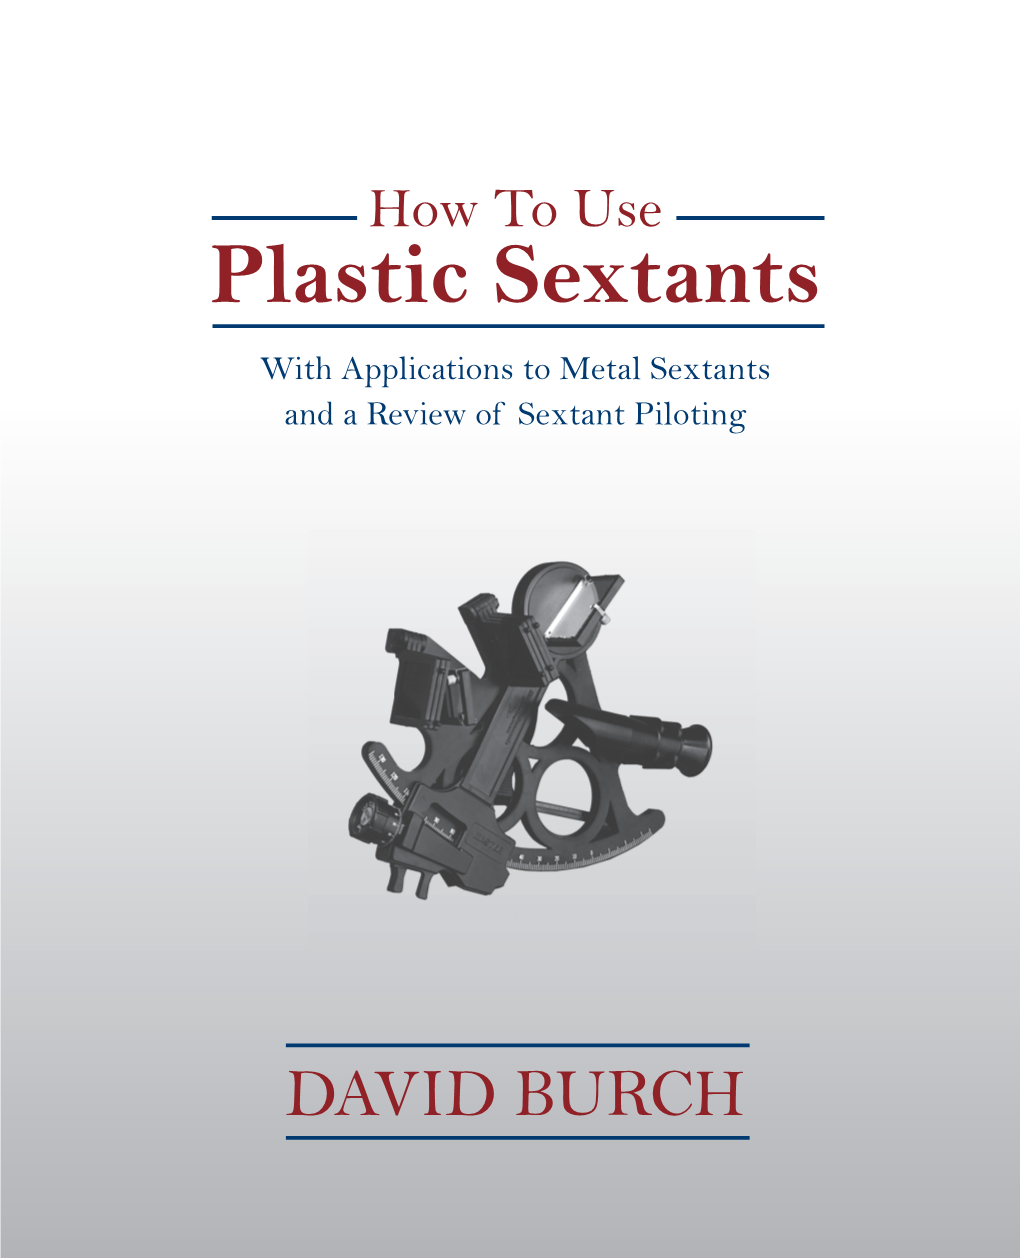 How to Use Plastic Sextants with Applications to Metal Sextants and a Review of Sextant Piloting